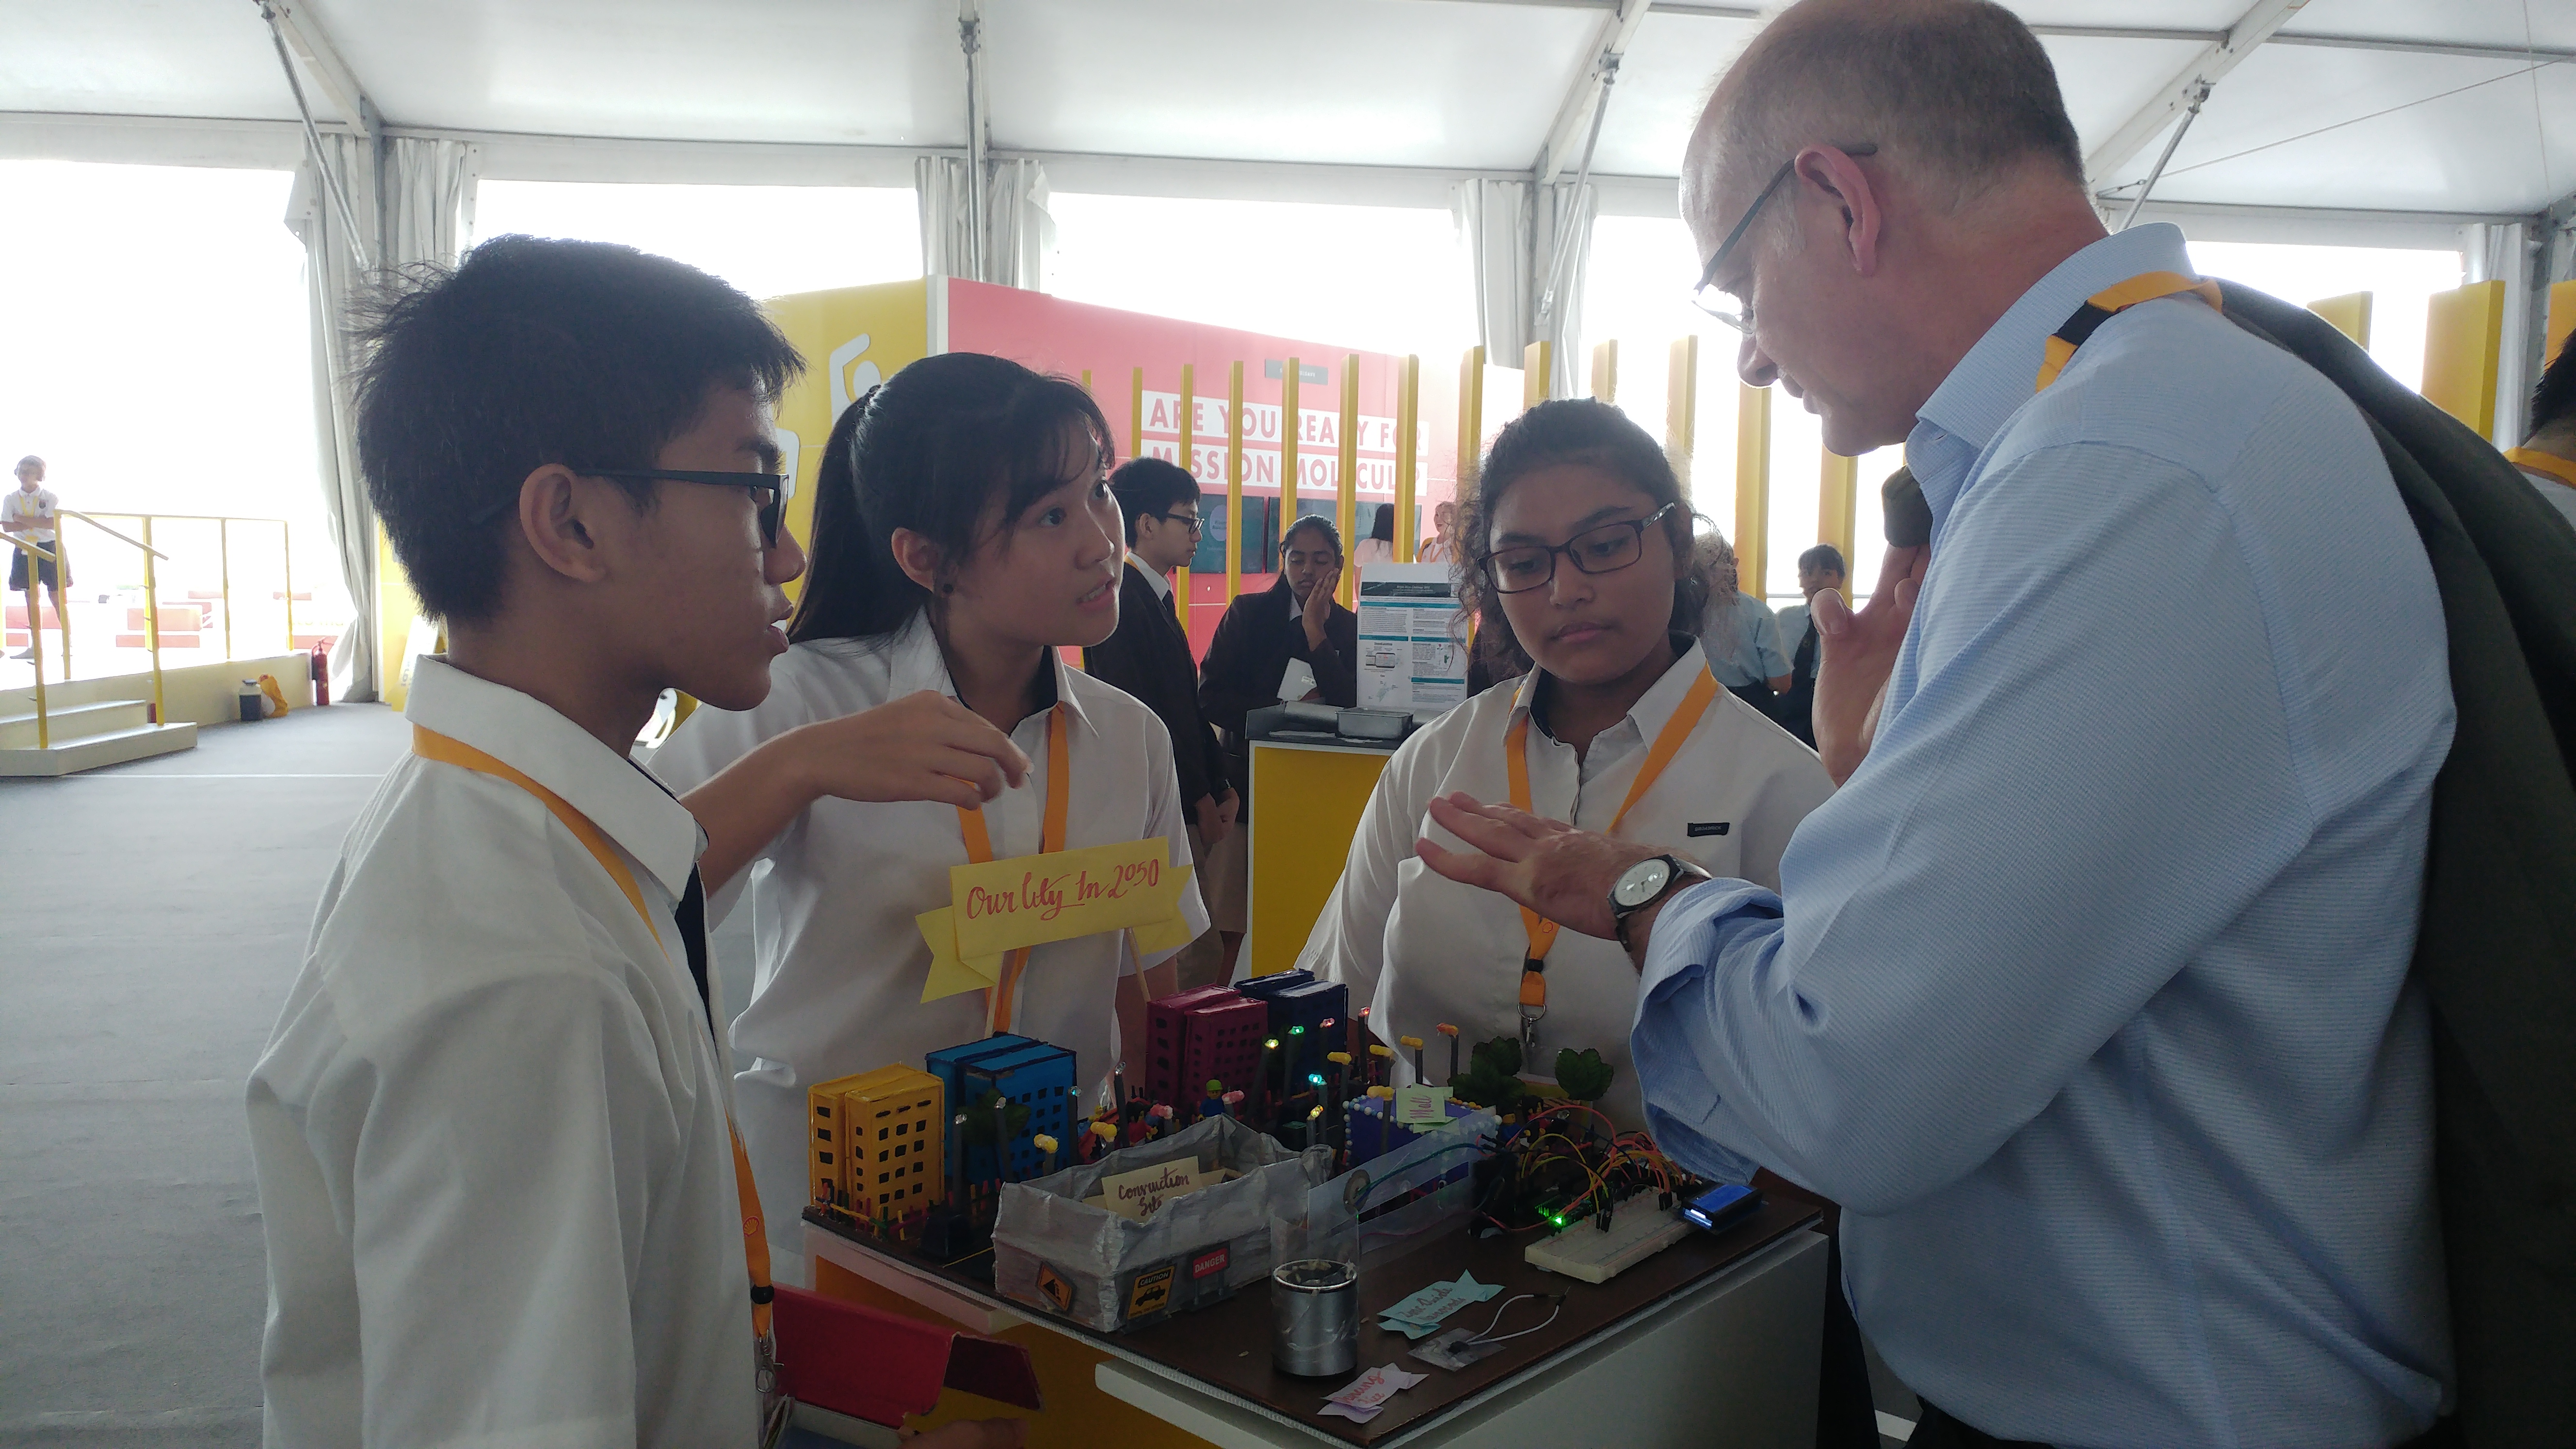 Benjamin, Siyu and Aminah of “The Triggered Team” explaining their prototype to the members of the public.

Photo credit: Broadrick Secondary School
